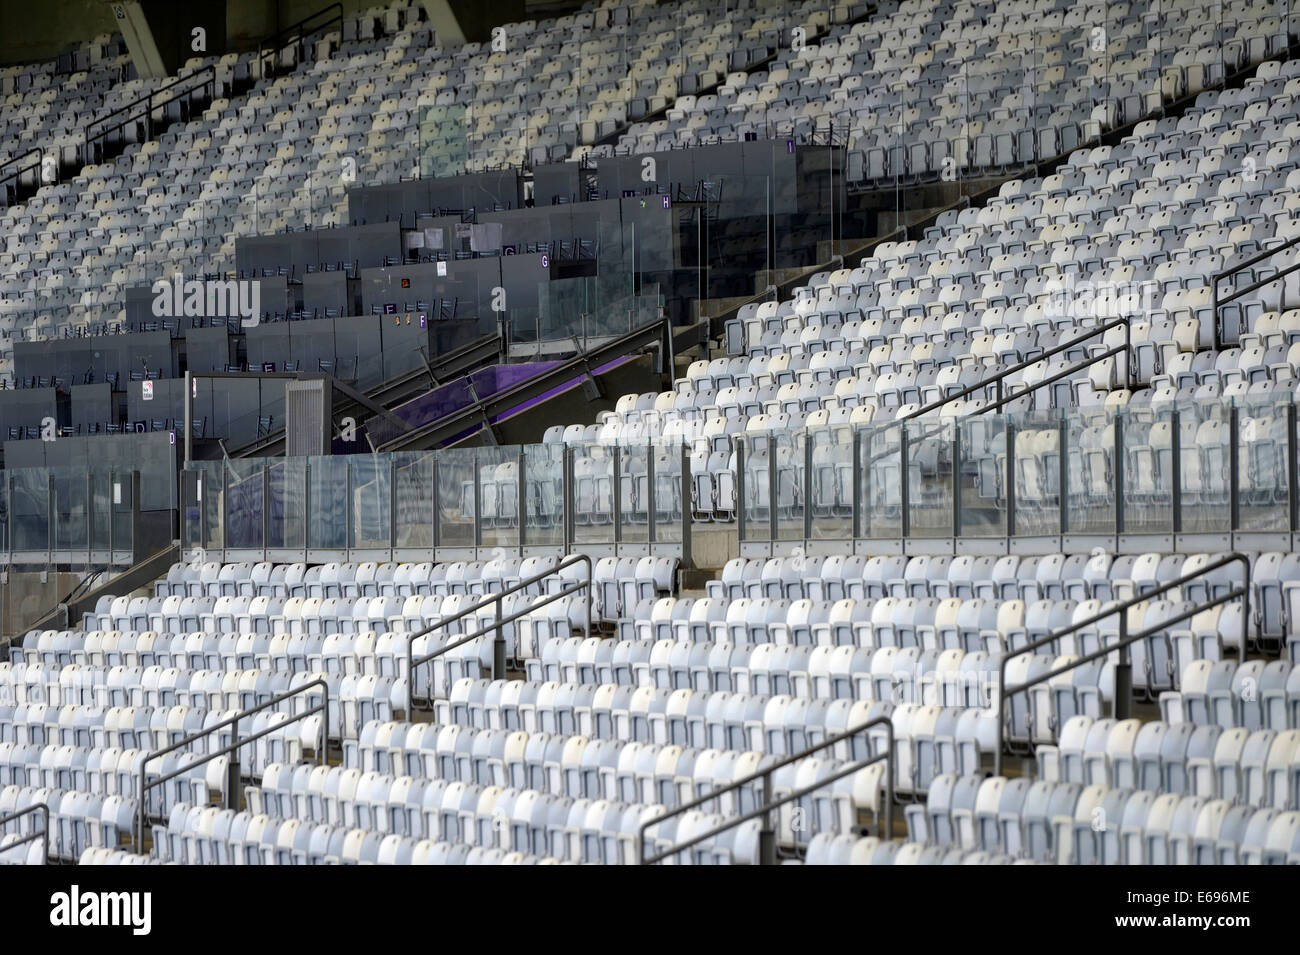 Spectator seating with press seats, venue for the FIFA World Cup 2014, Estadio Governador Magalhaes Pinto or Mineirao Stock Photo